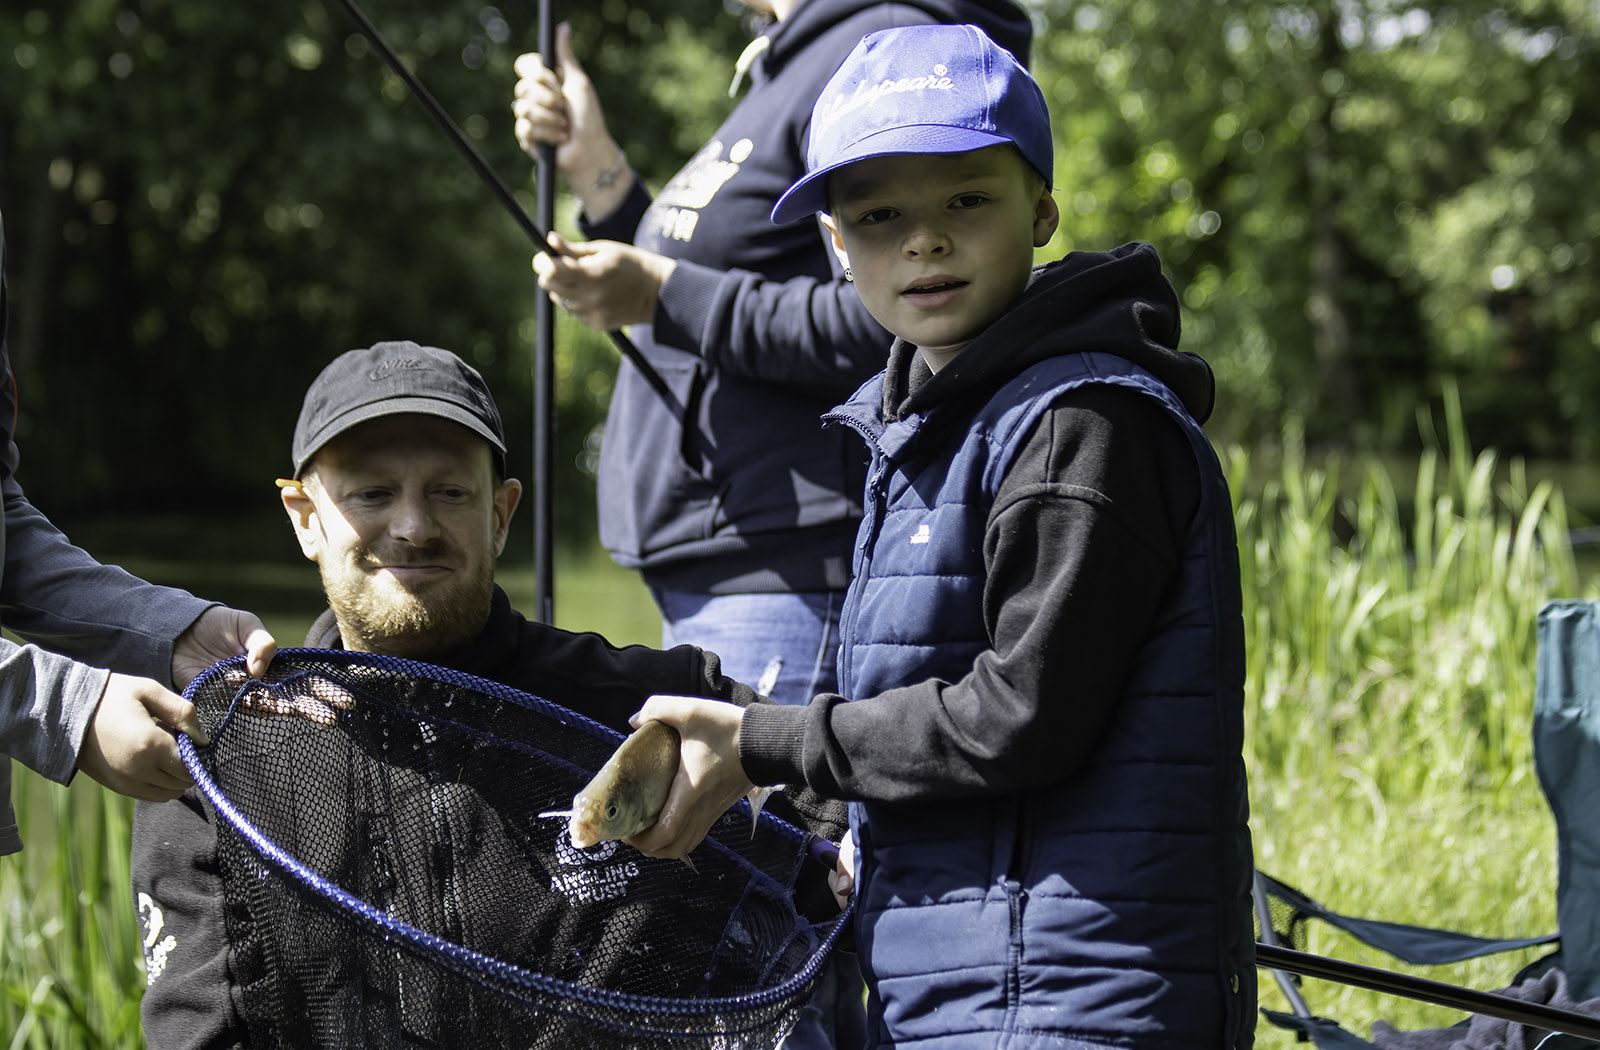 Get Fishing | Reel Education - ‘FS Angling Network’ fbred55